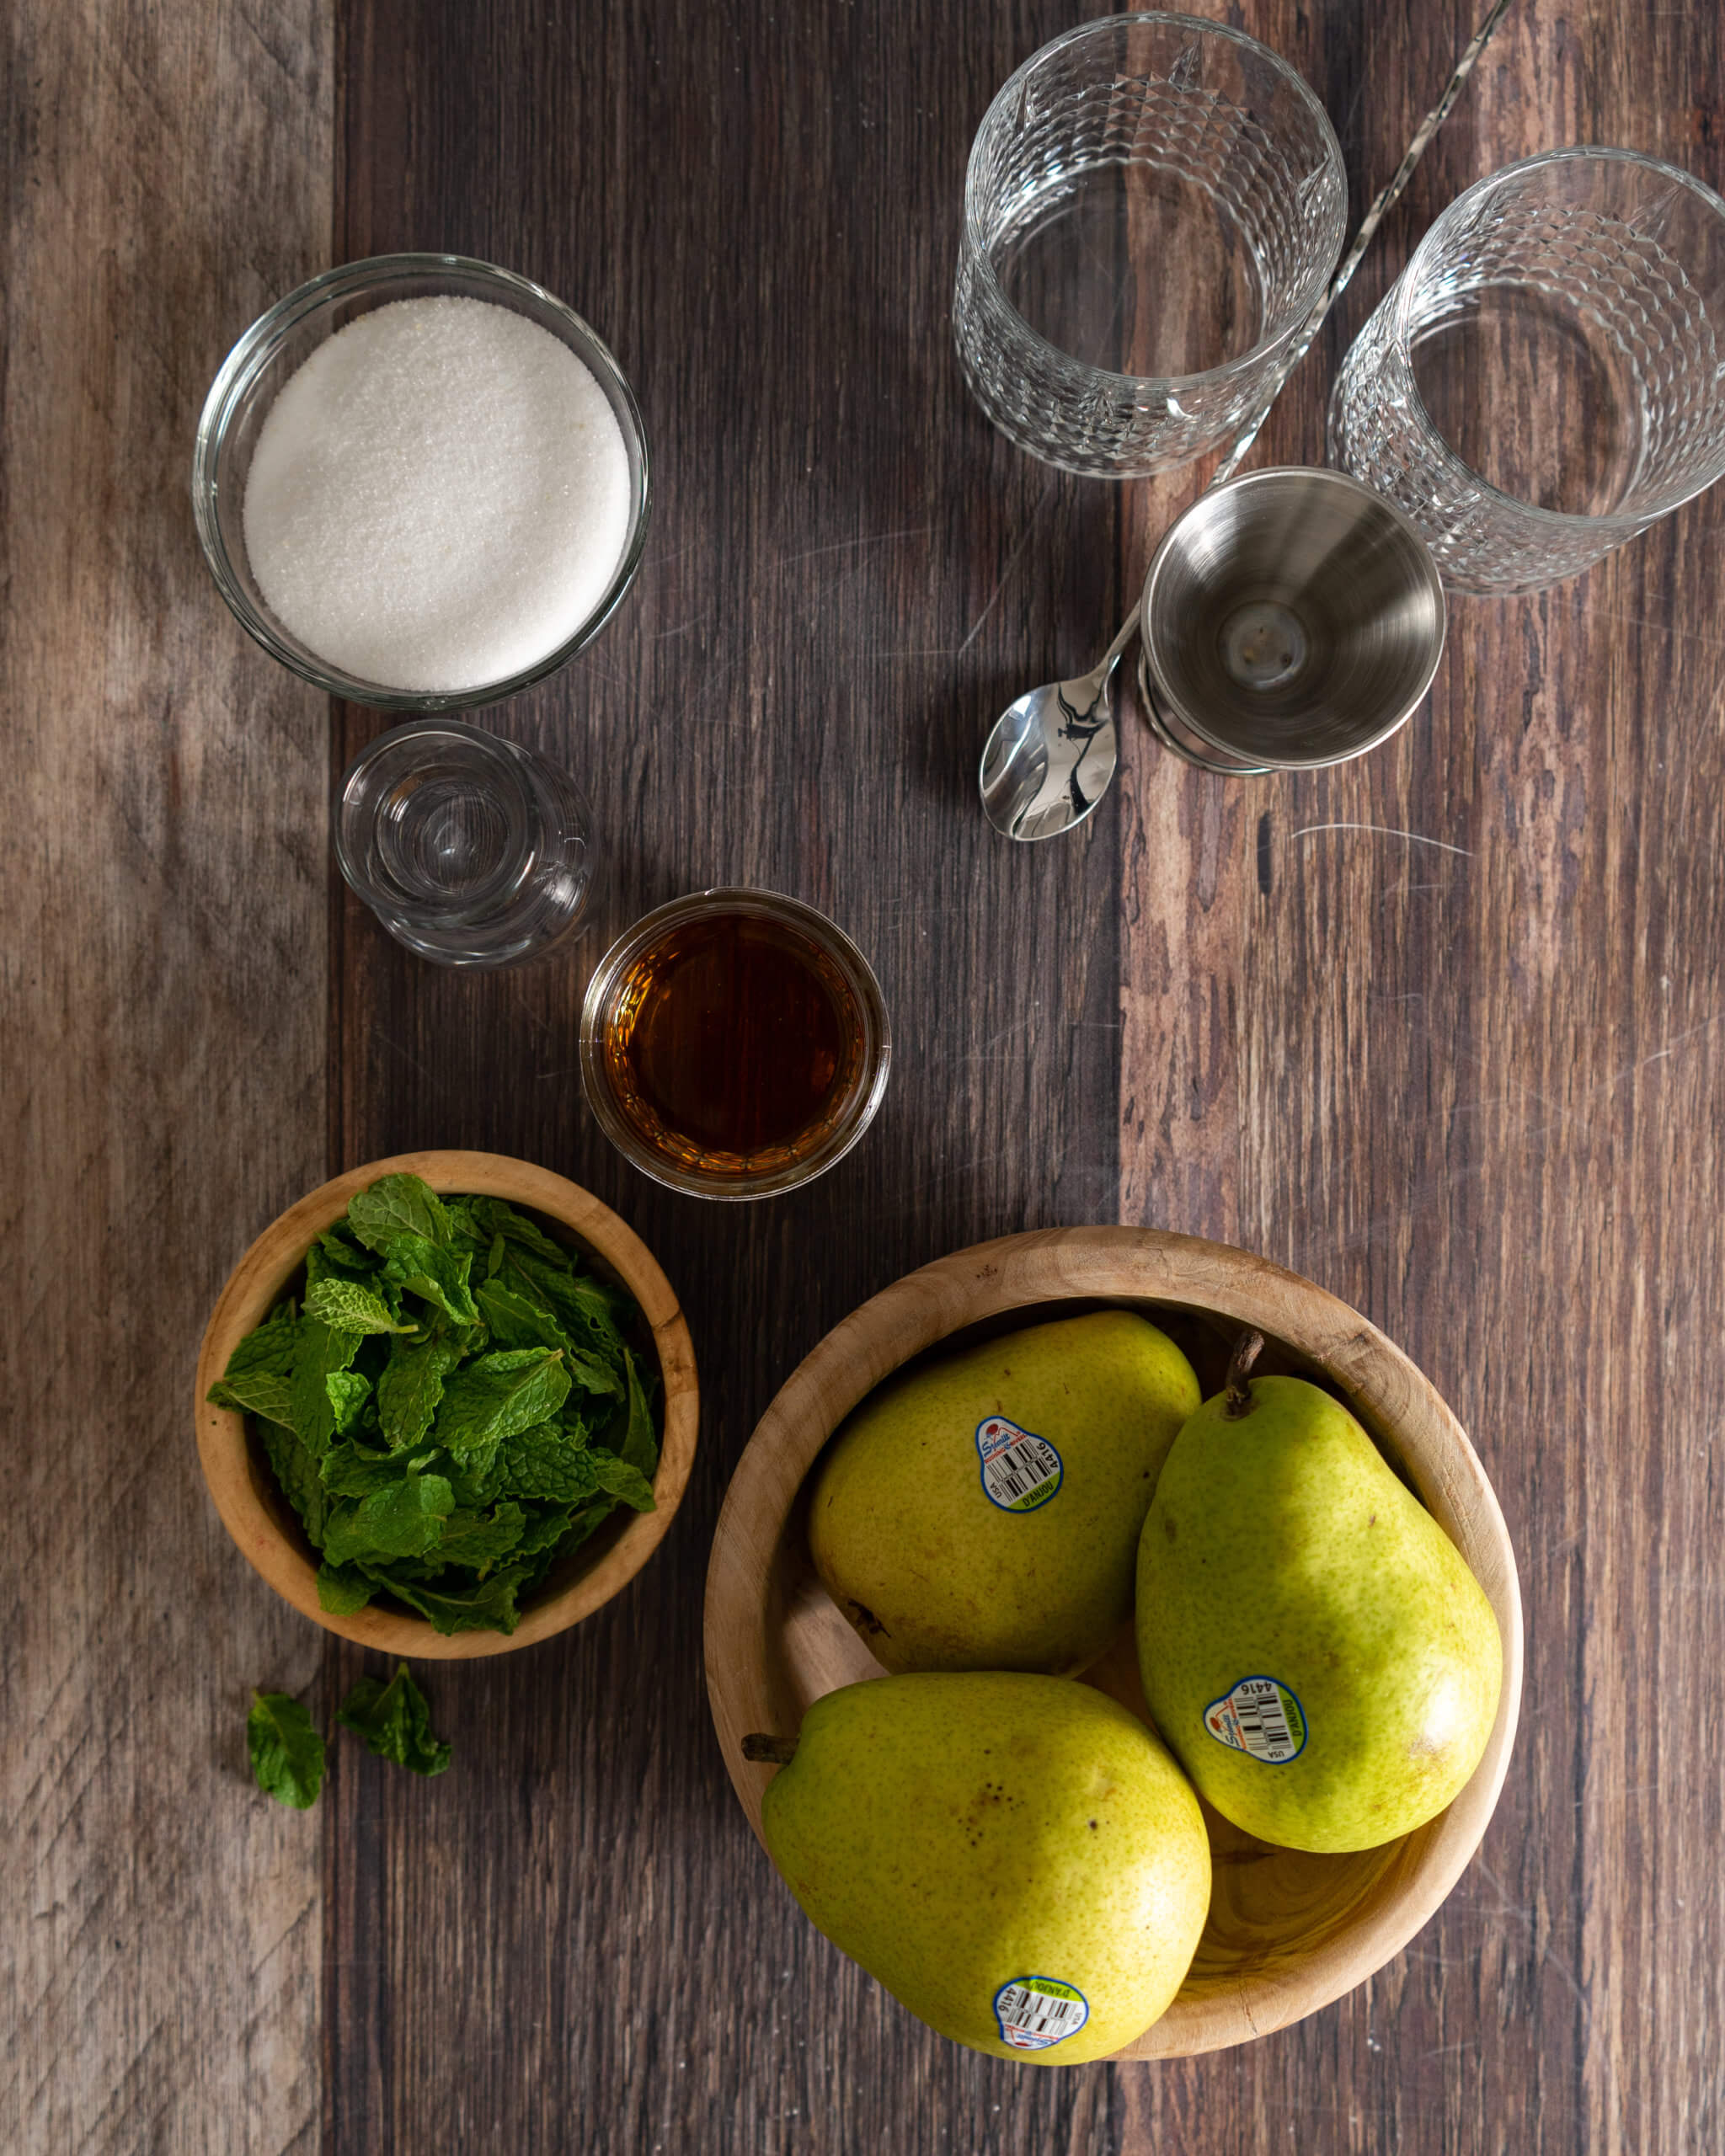 Ingredients for Pear Mint Julep